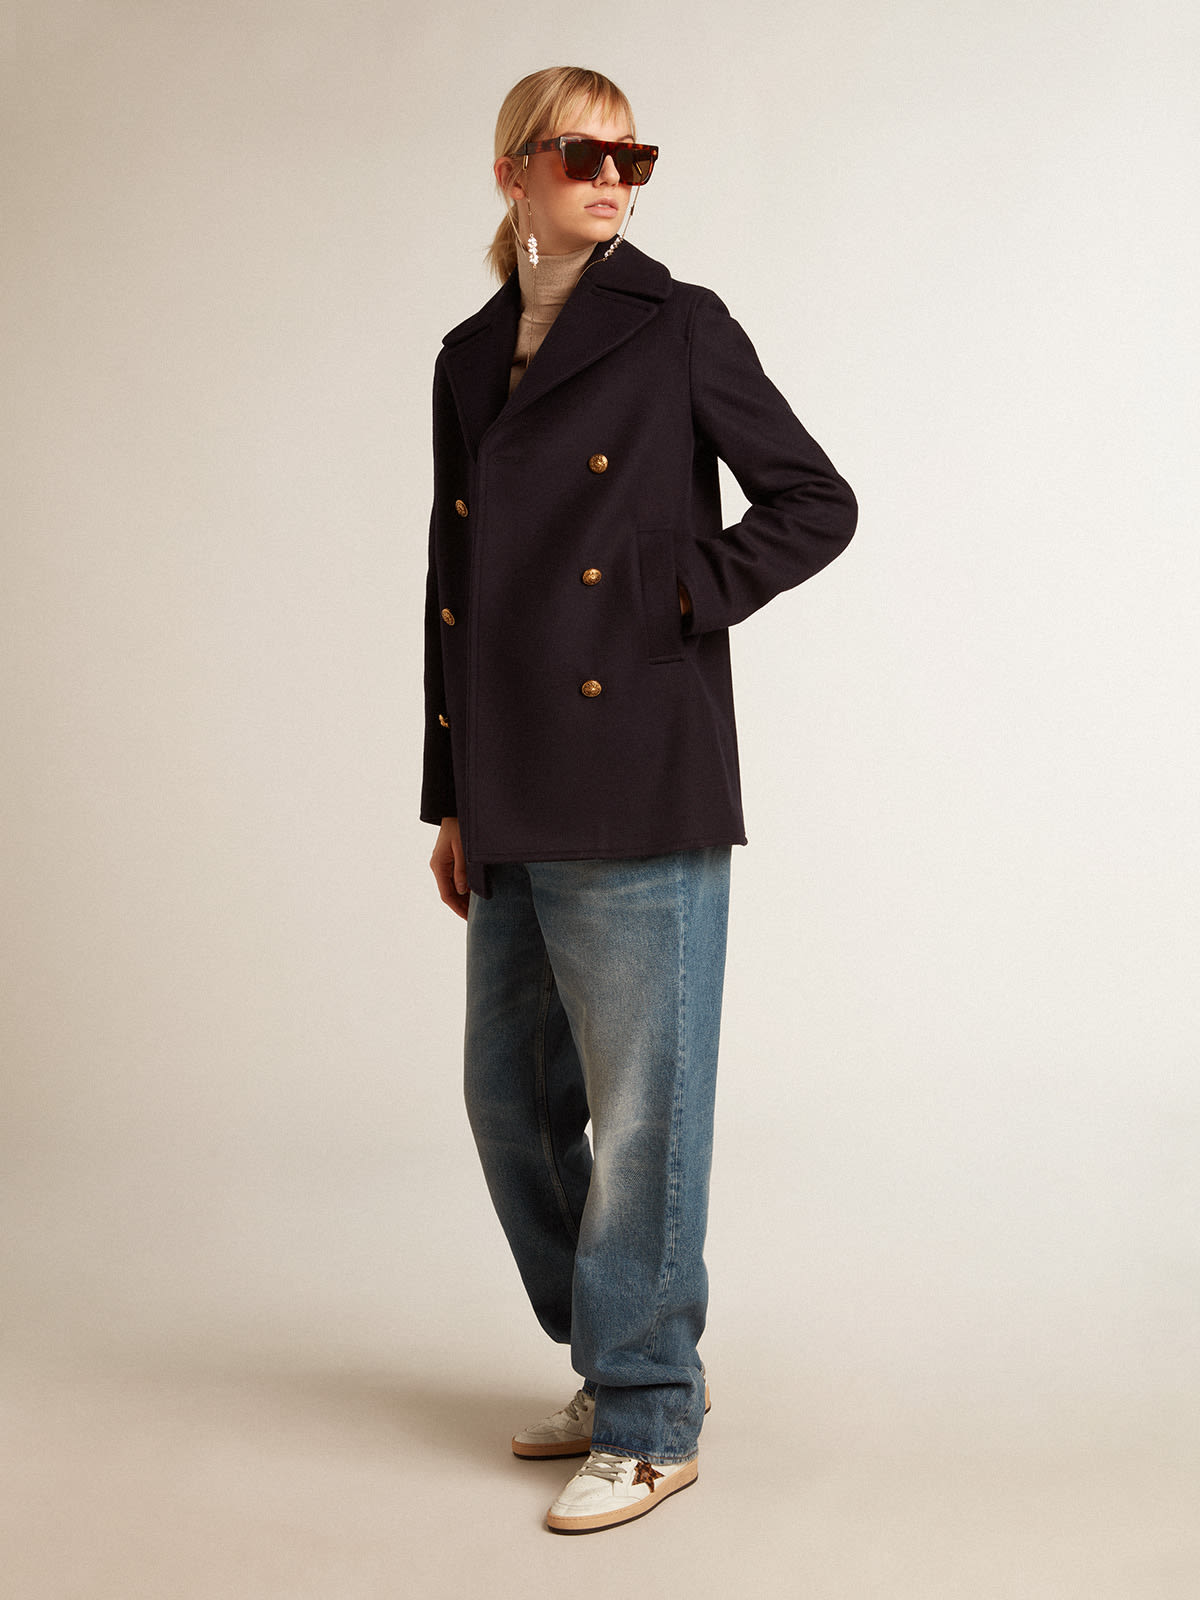 Golden Goose - Women’s dark blue peacoat with gold-colored heraldic buttons in 